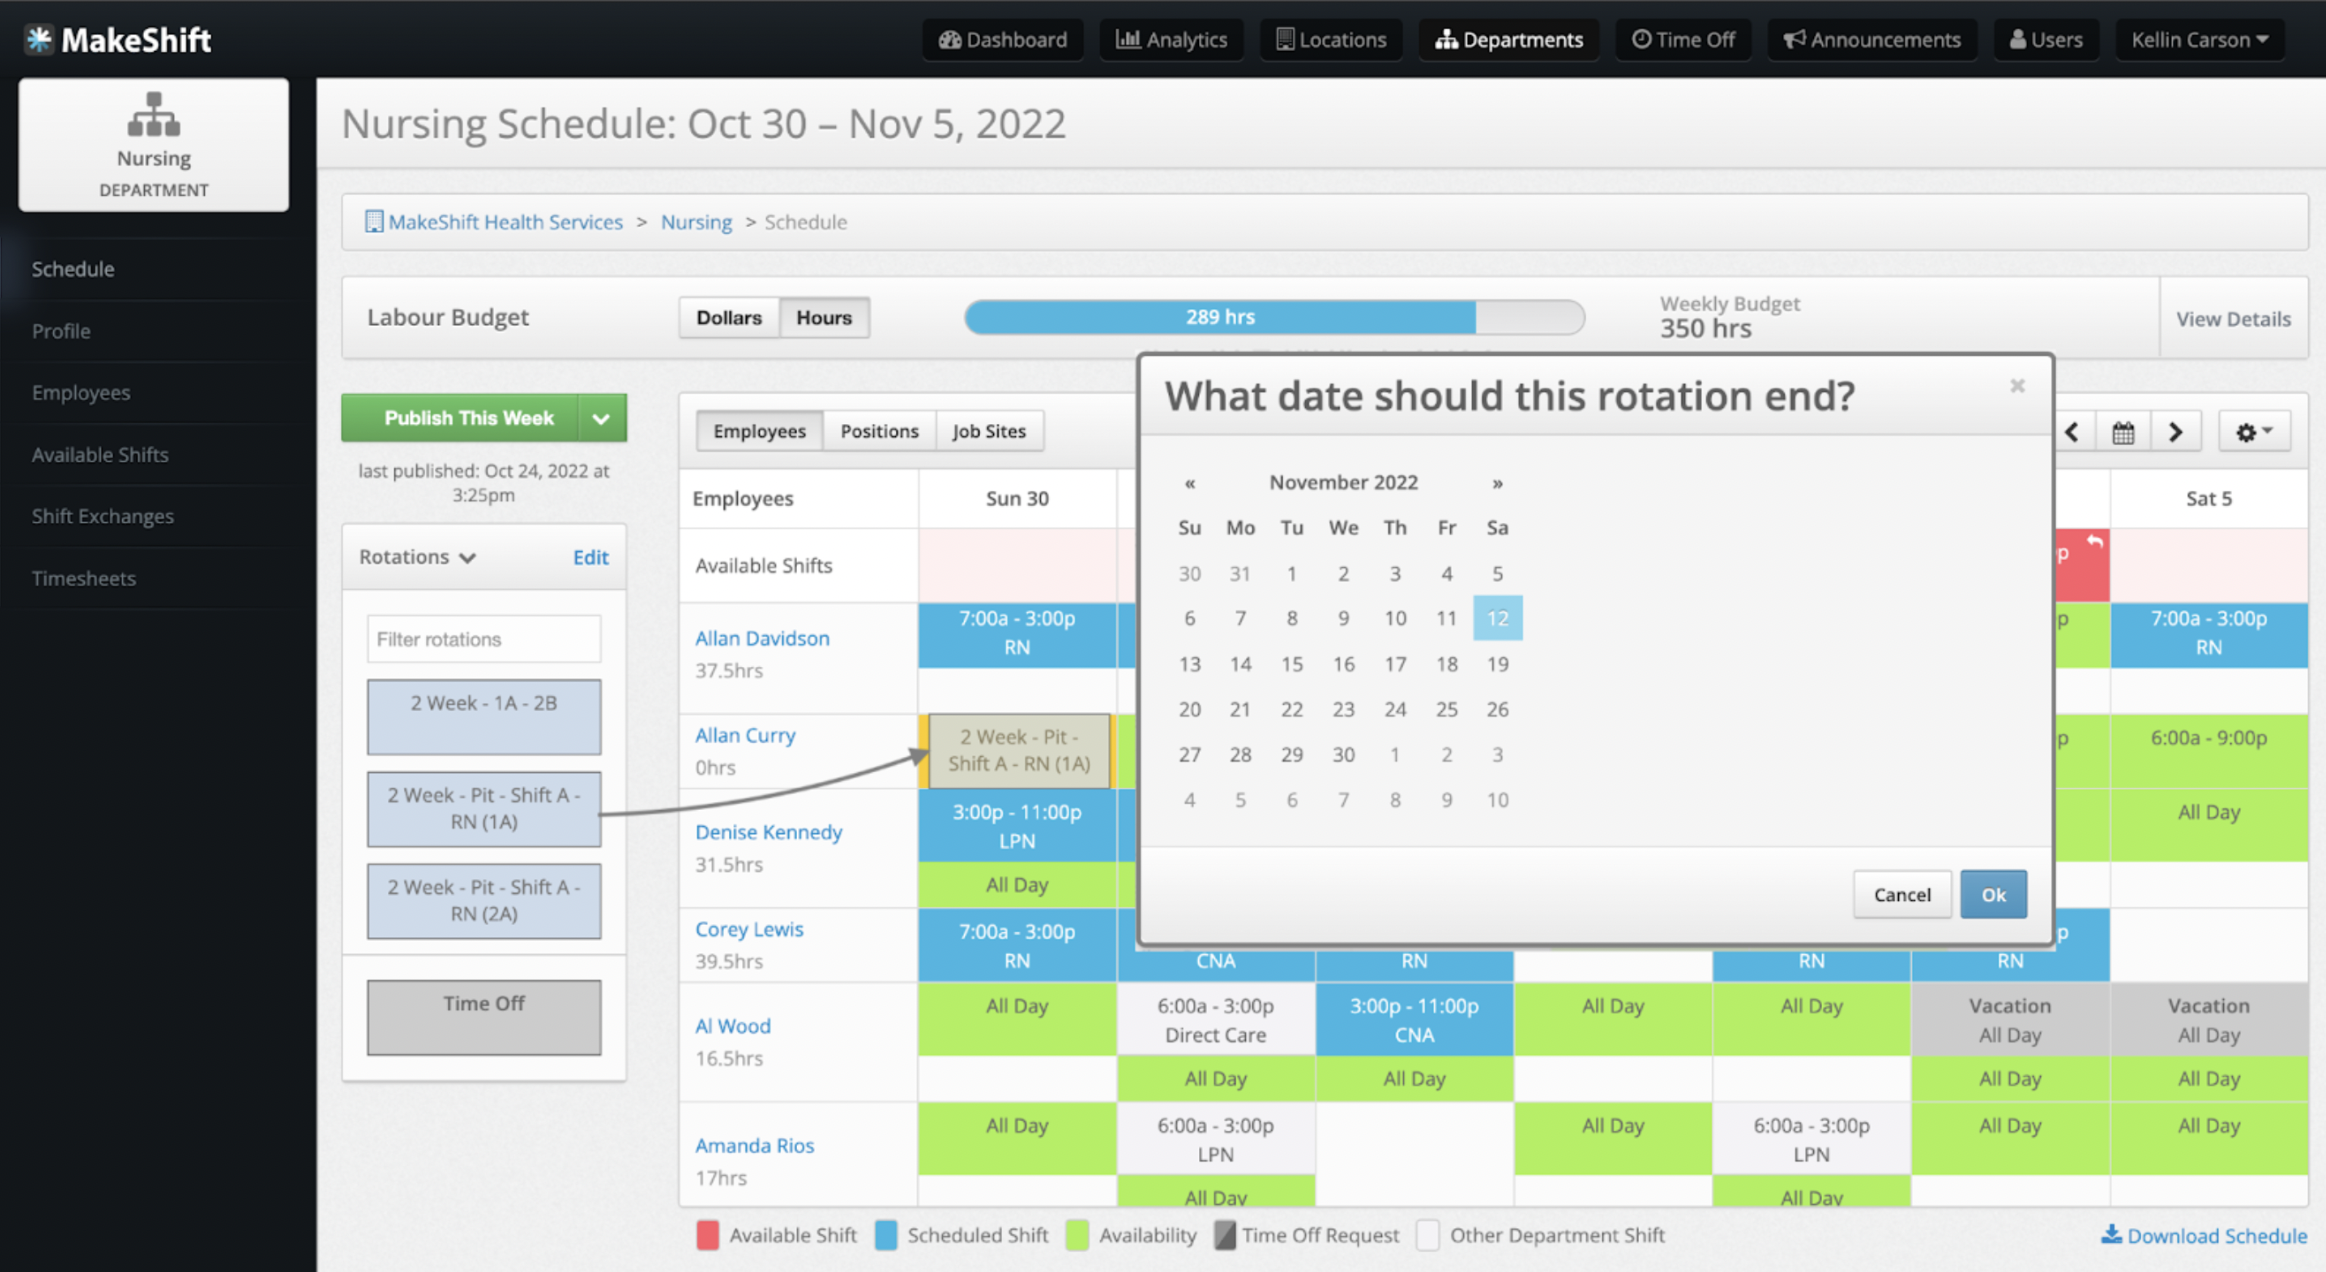 Rotation-Based Scheduling